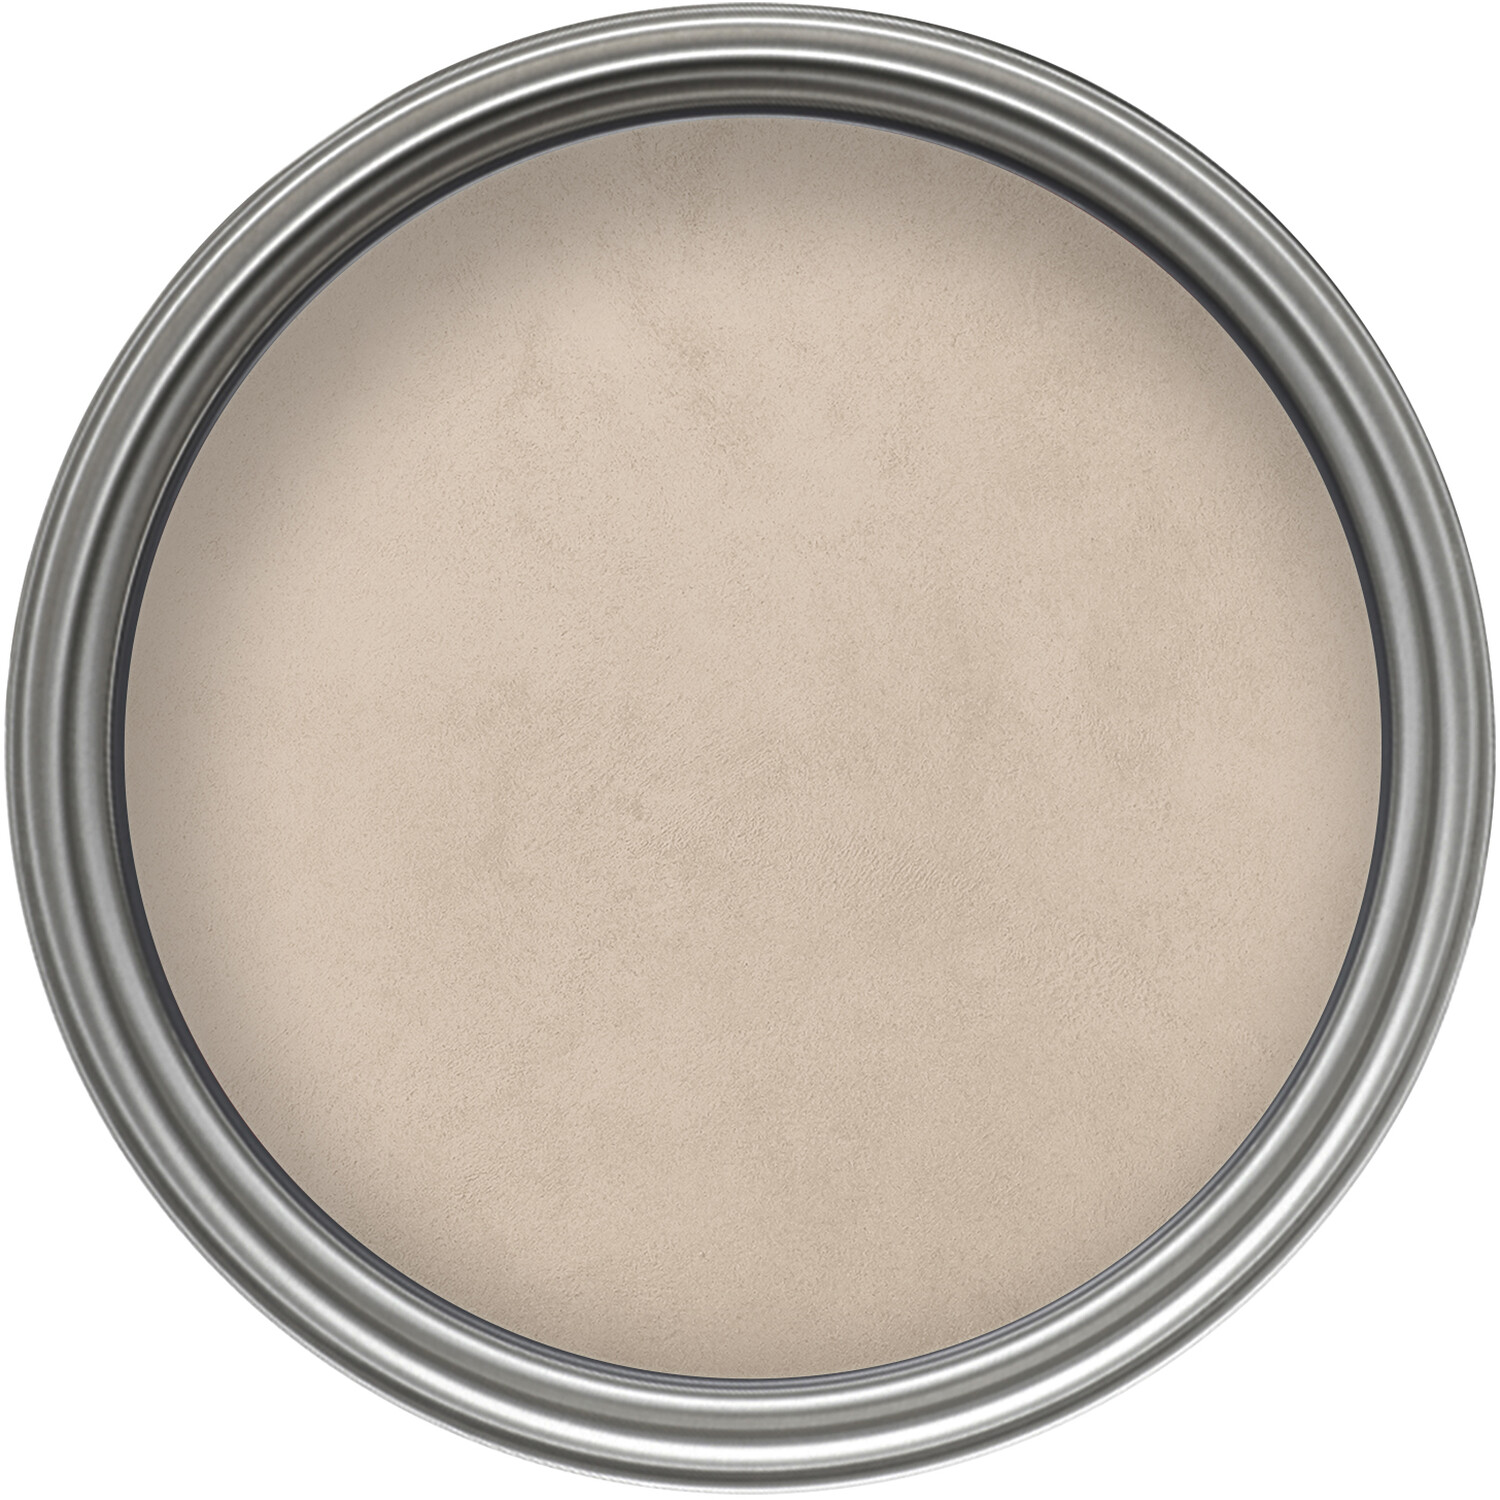 Crown Crafted Walls Fawn Suede Textured Finish Paint 2.5L Image 3